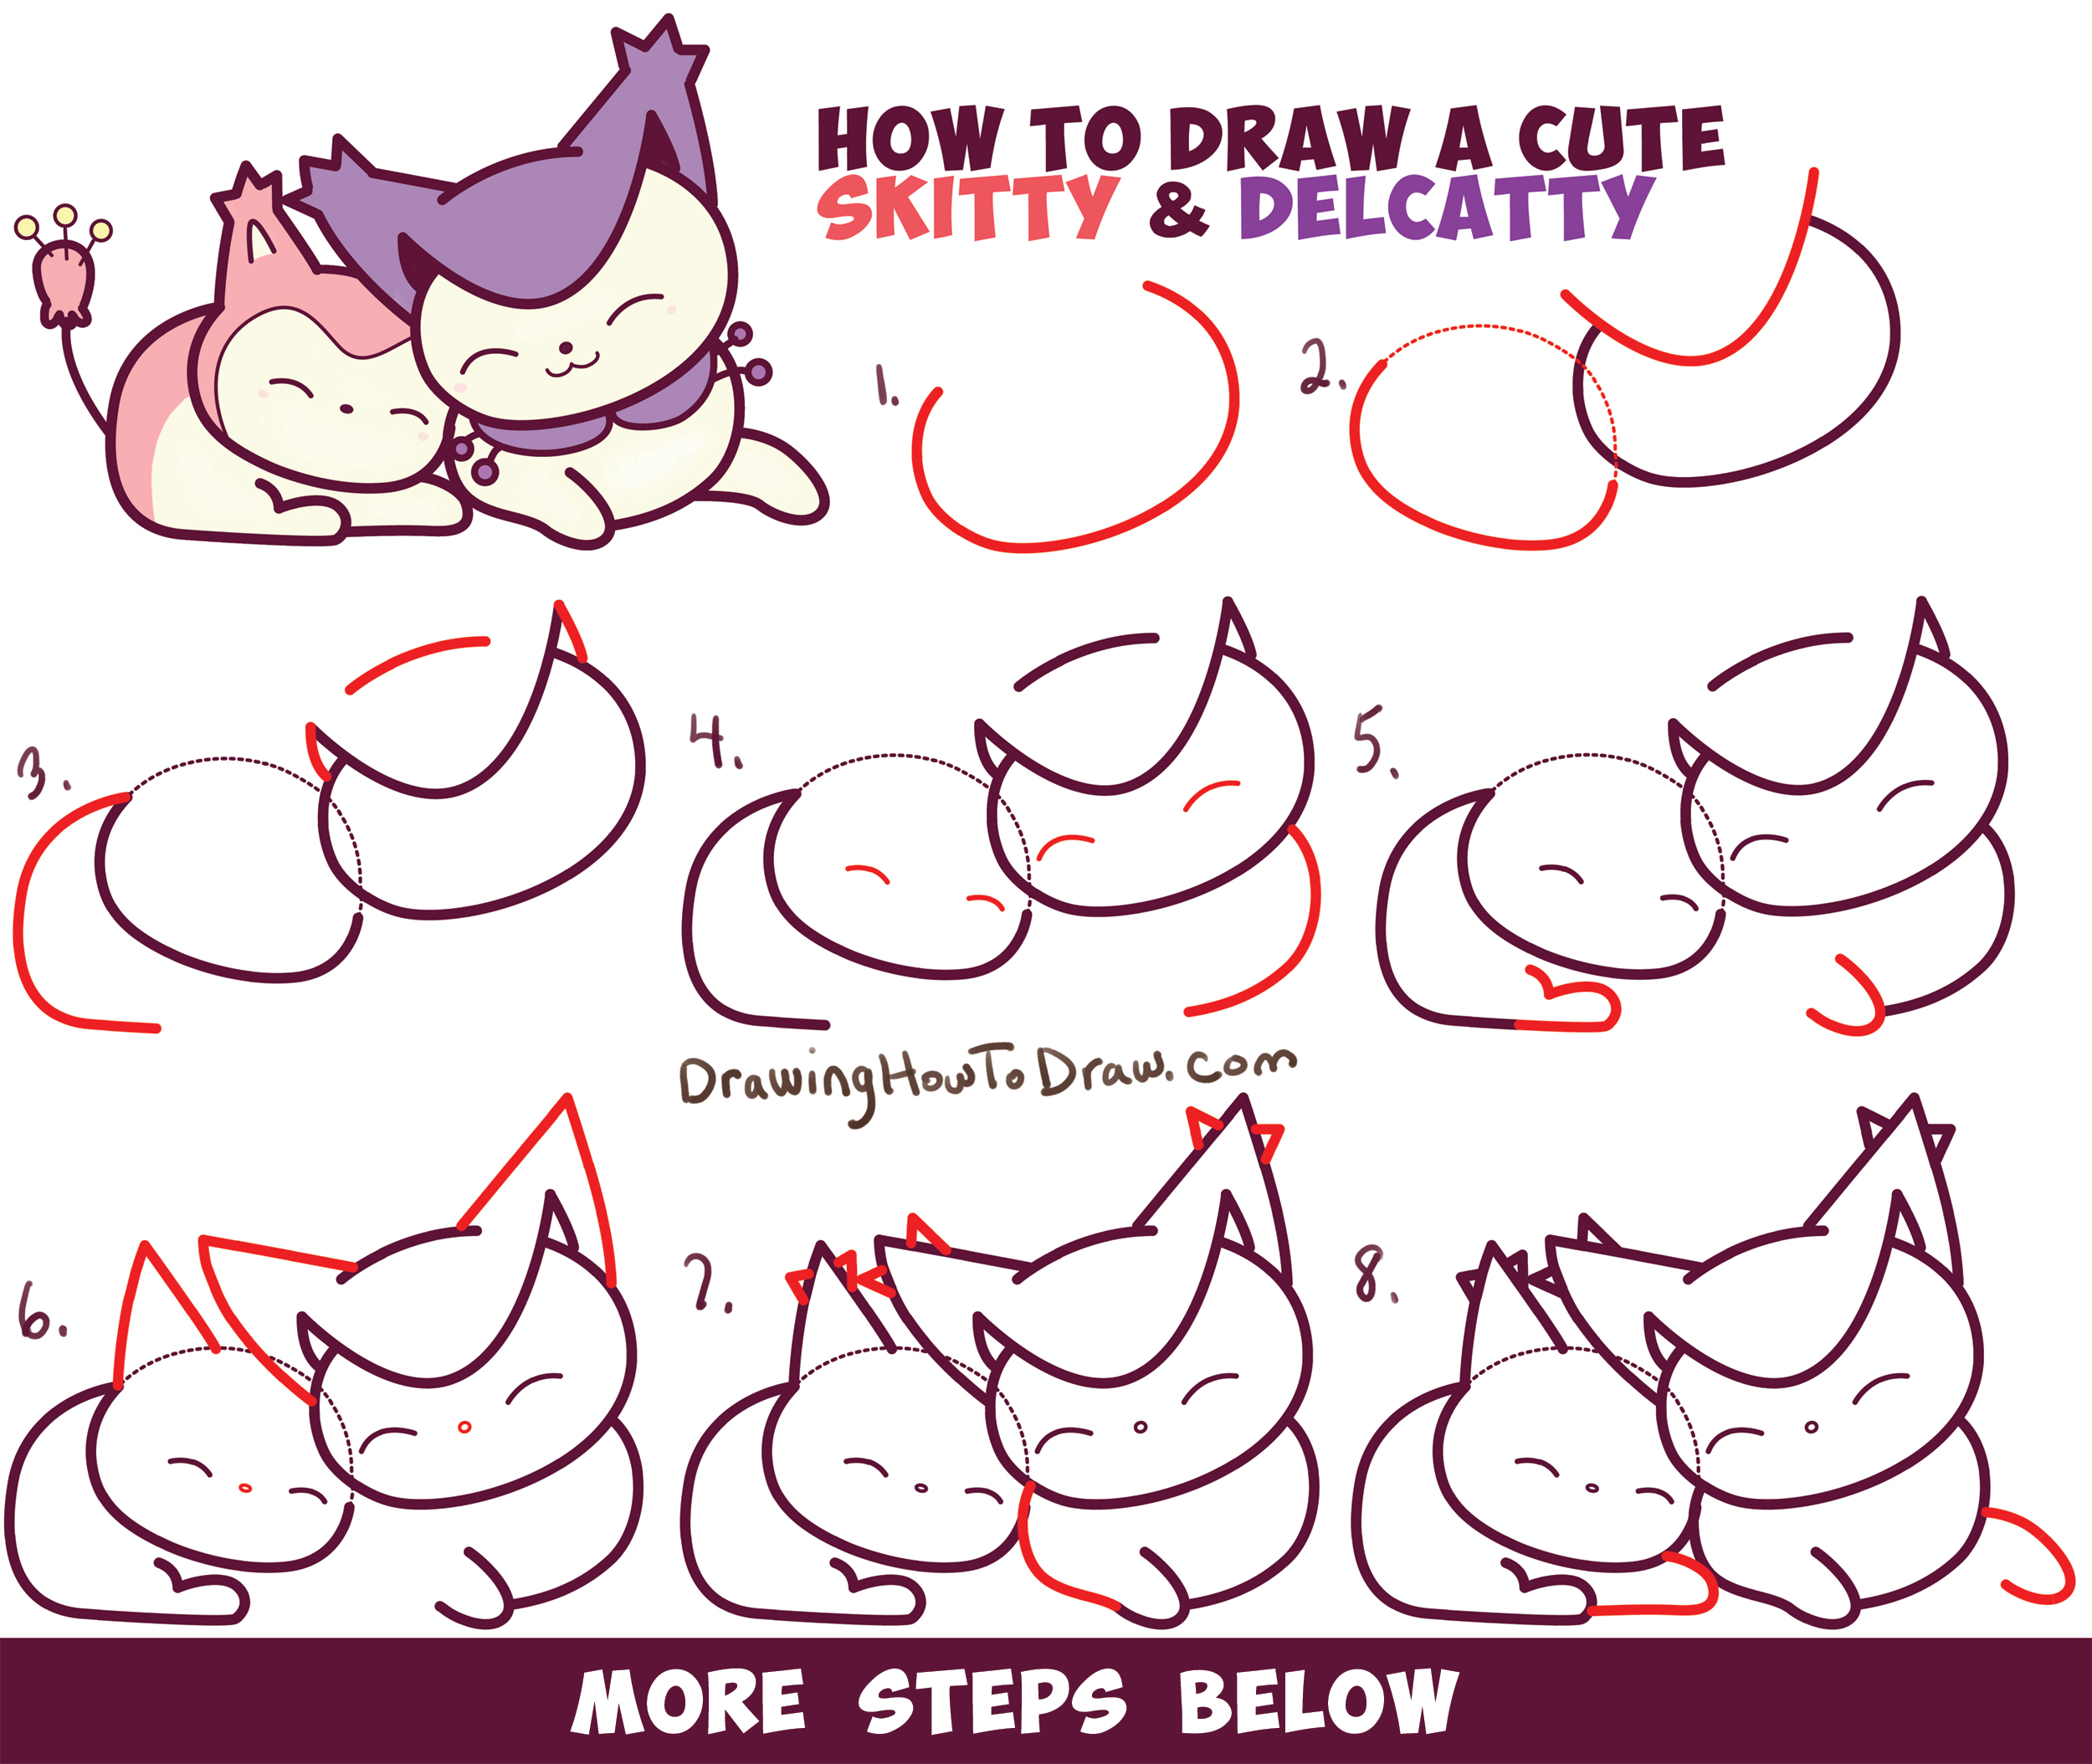 Learn How to Draw Delcatty and Skitty (cute / kawaii / chibi) from Pokemon with Easy Steps Drawing Lesson for Beginners